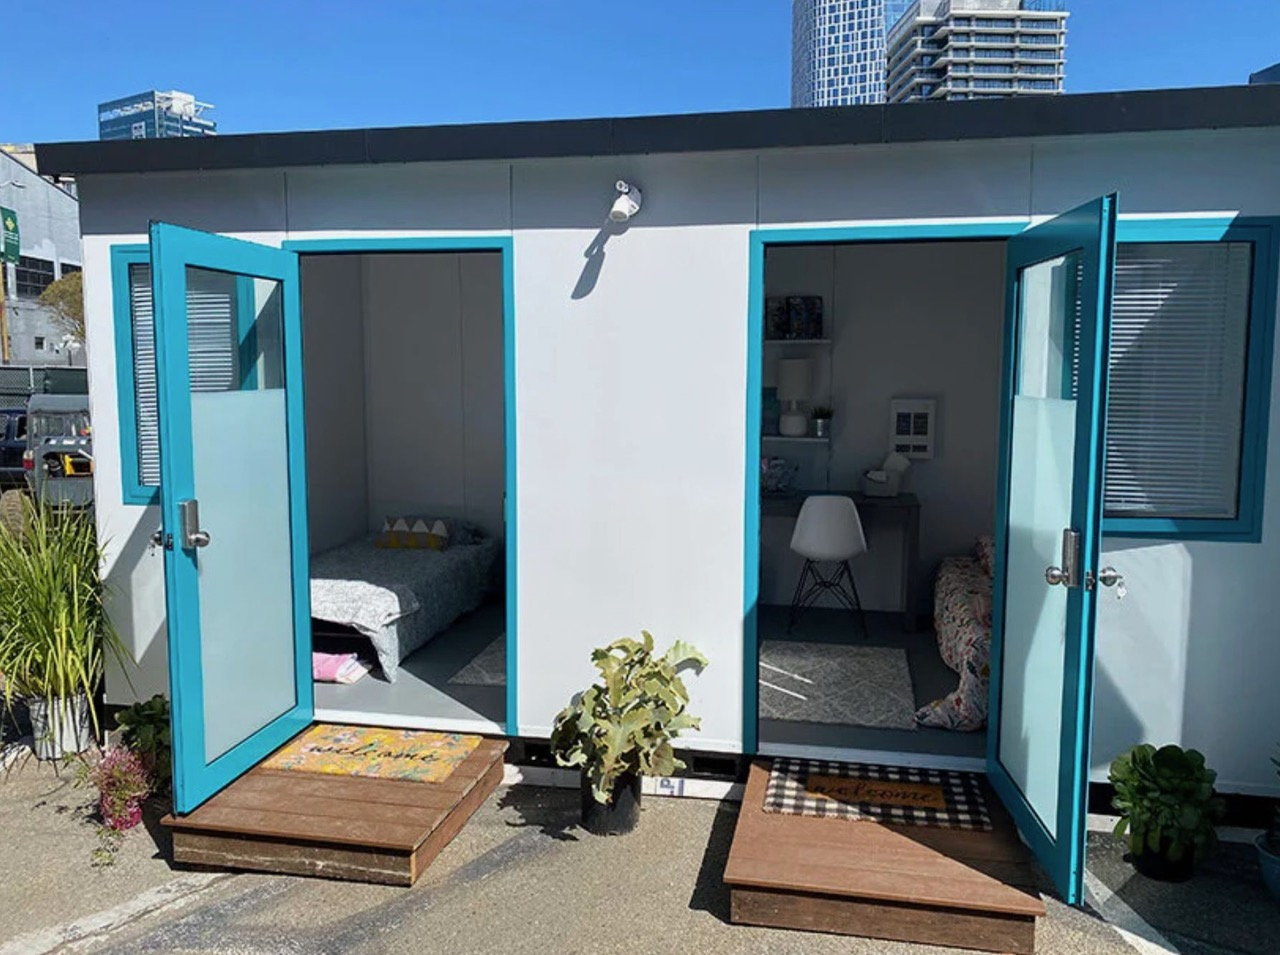 Can a New Tiny Home Village Help Address California?s Homelessness Crisis"